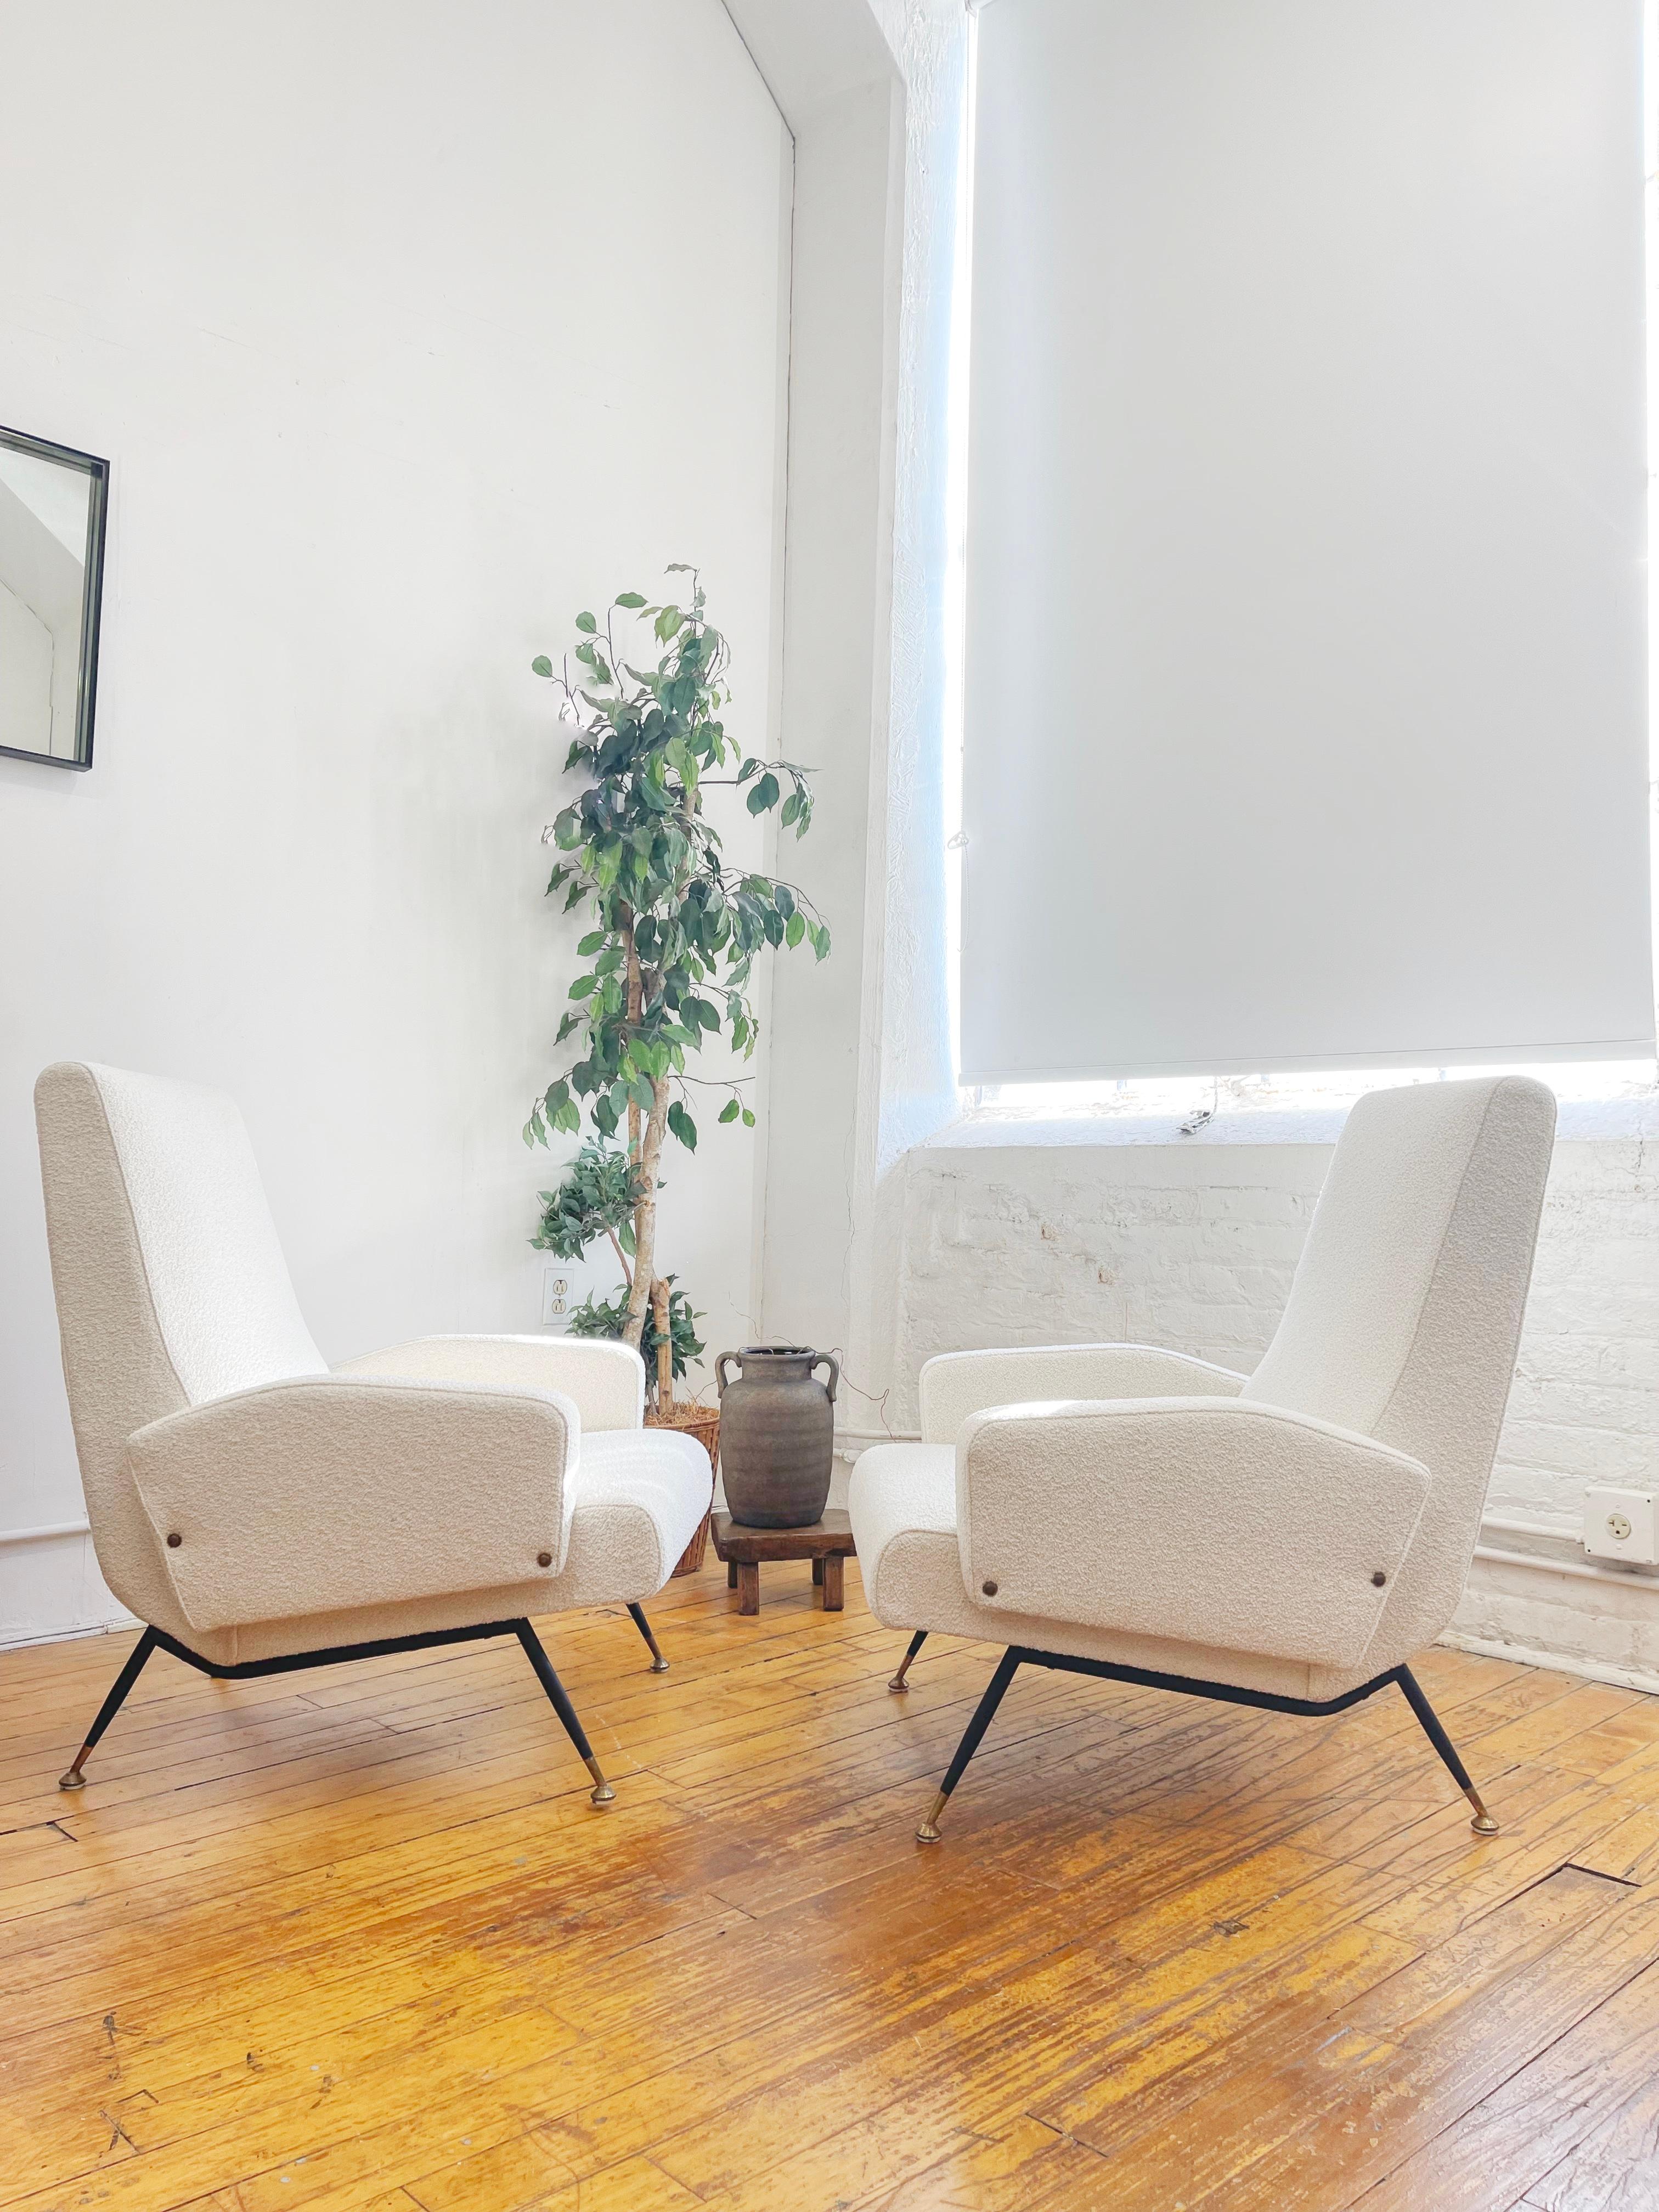 Transform your space with these exquisite Italian lounge chairs from the 1950s, designed by Nino Zoncada. Expertly restored and tastefully upholstered in a luxurious Italian white boucle, these vintage armchairs radiate timeless elegance and